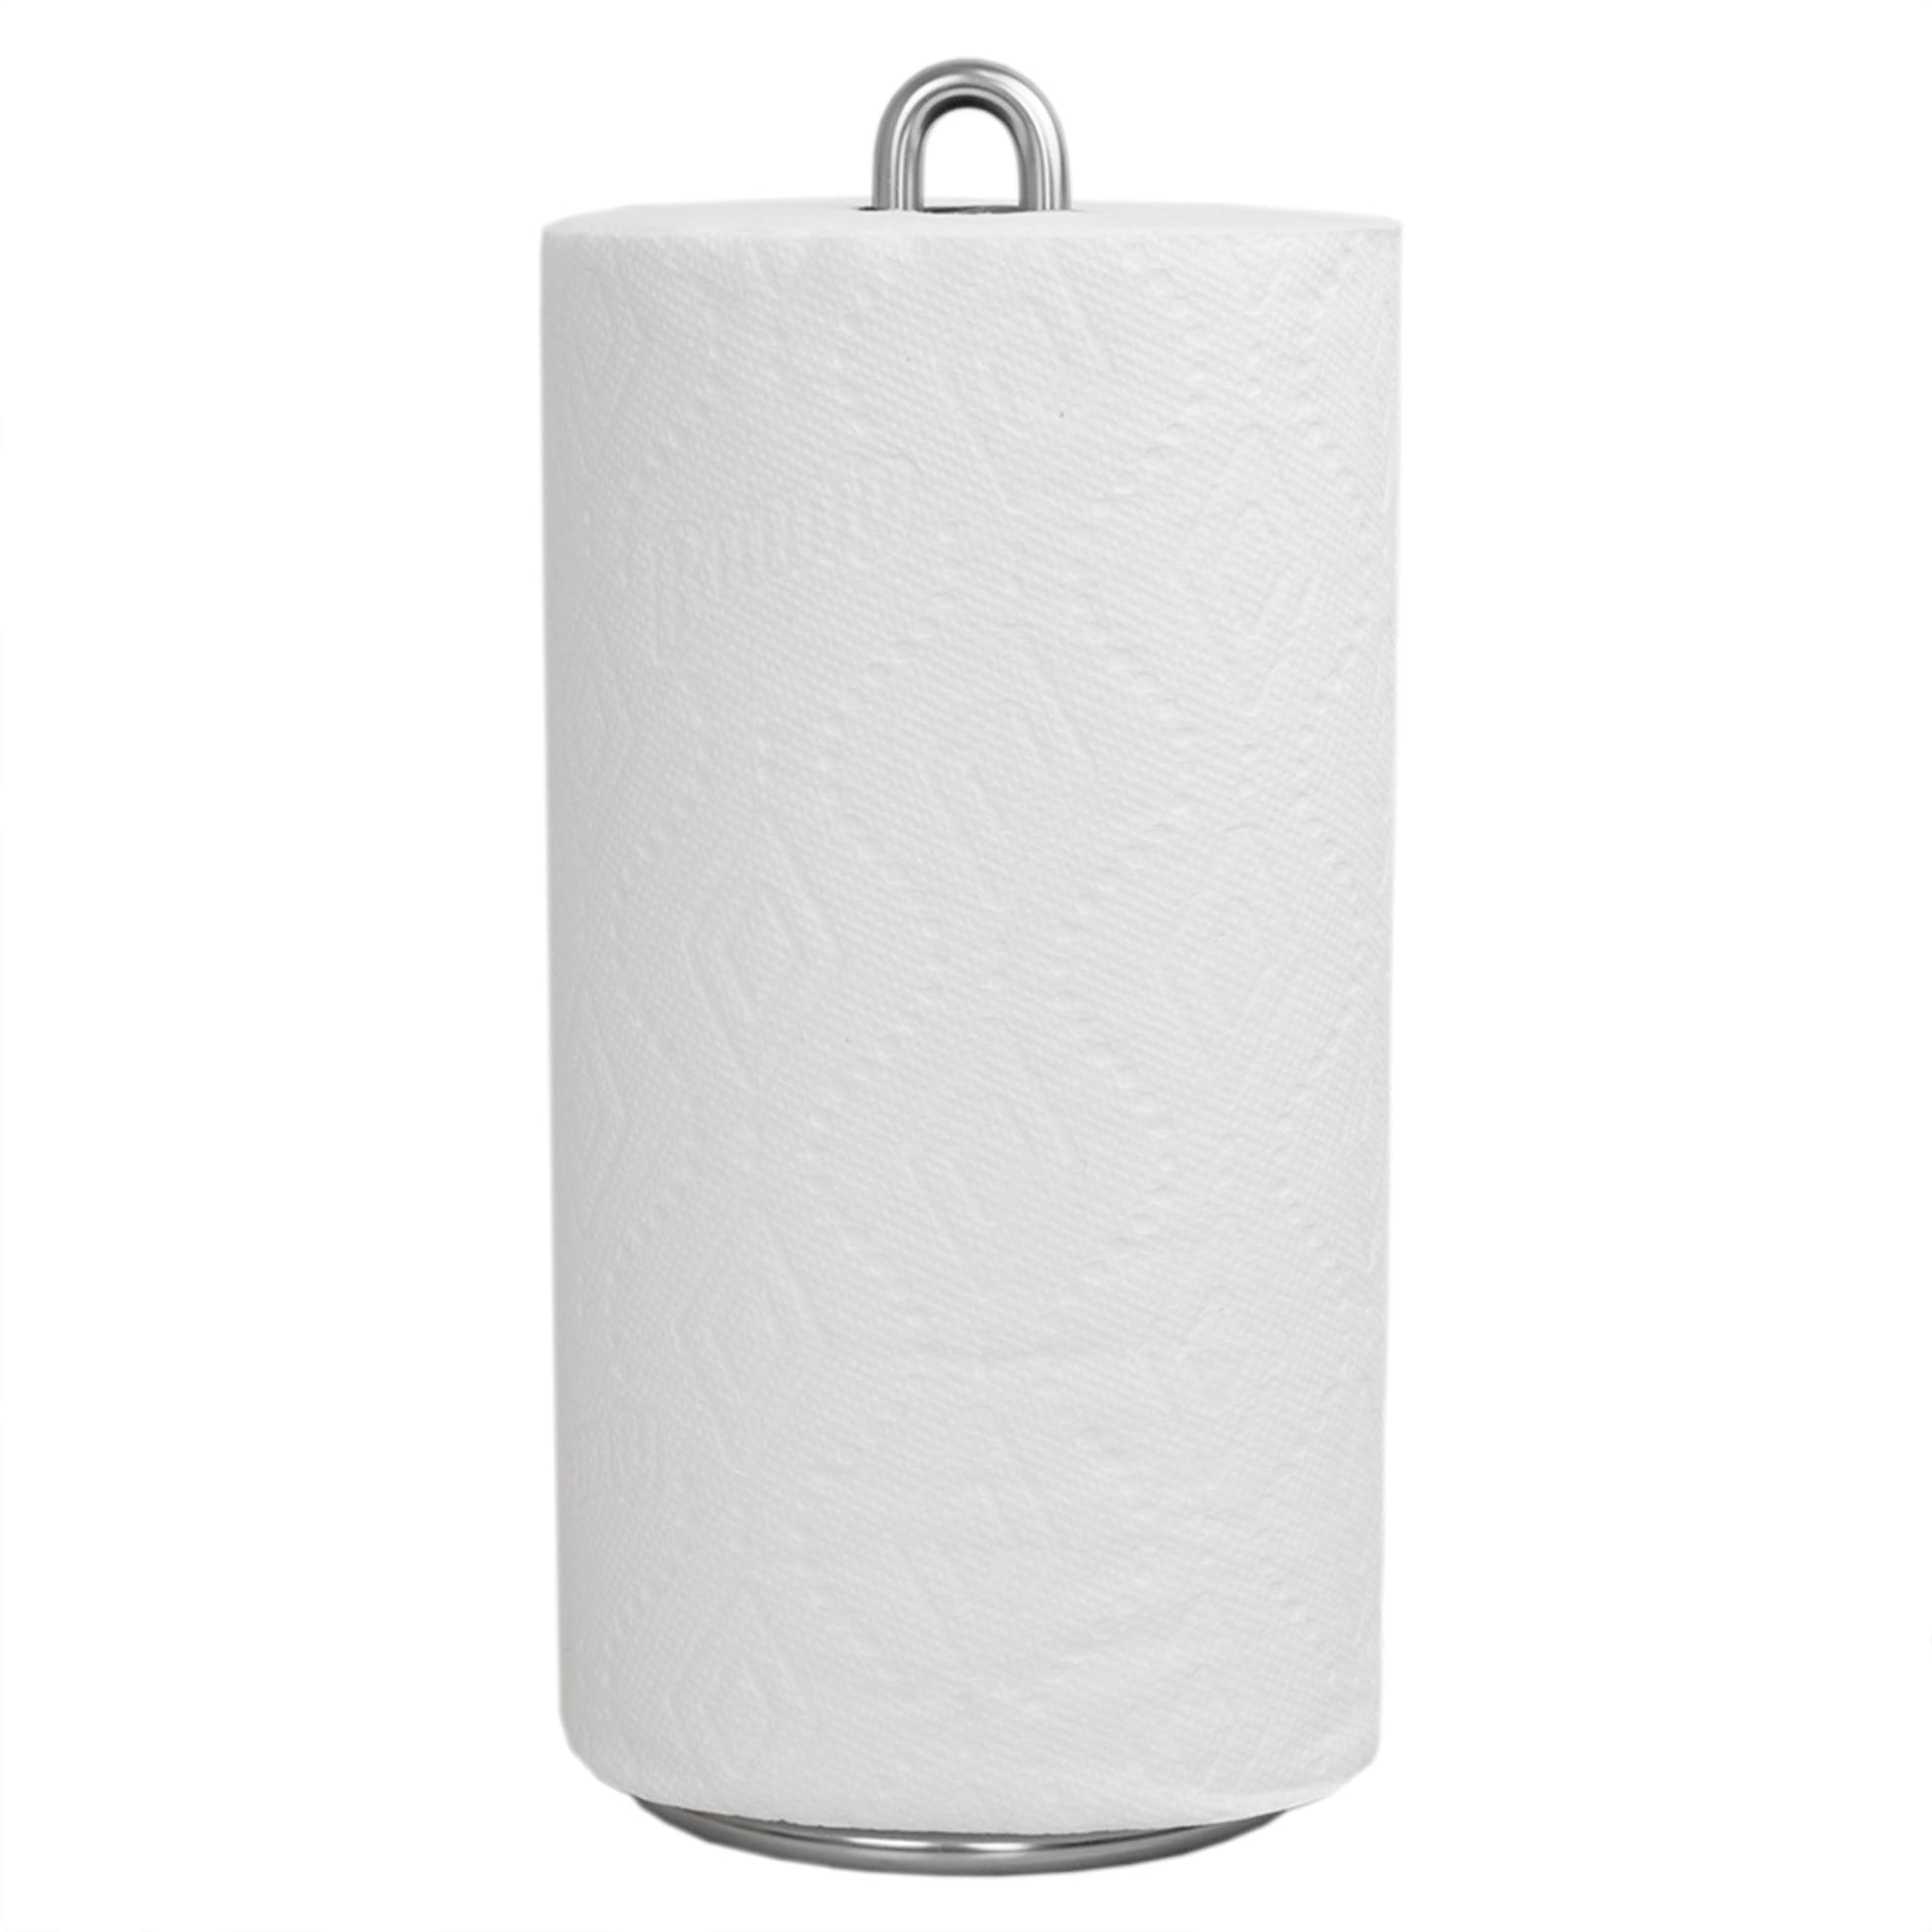 at Home Chrome Paper Towel Holder